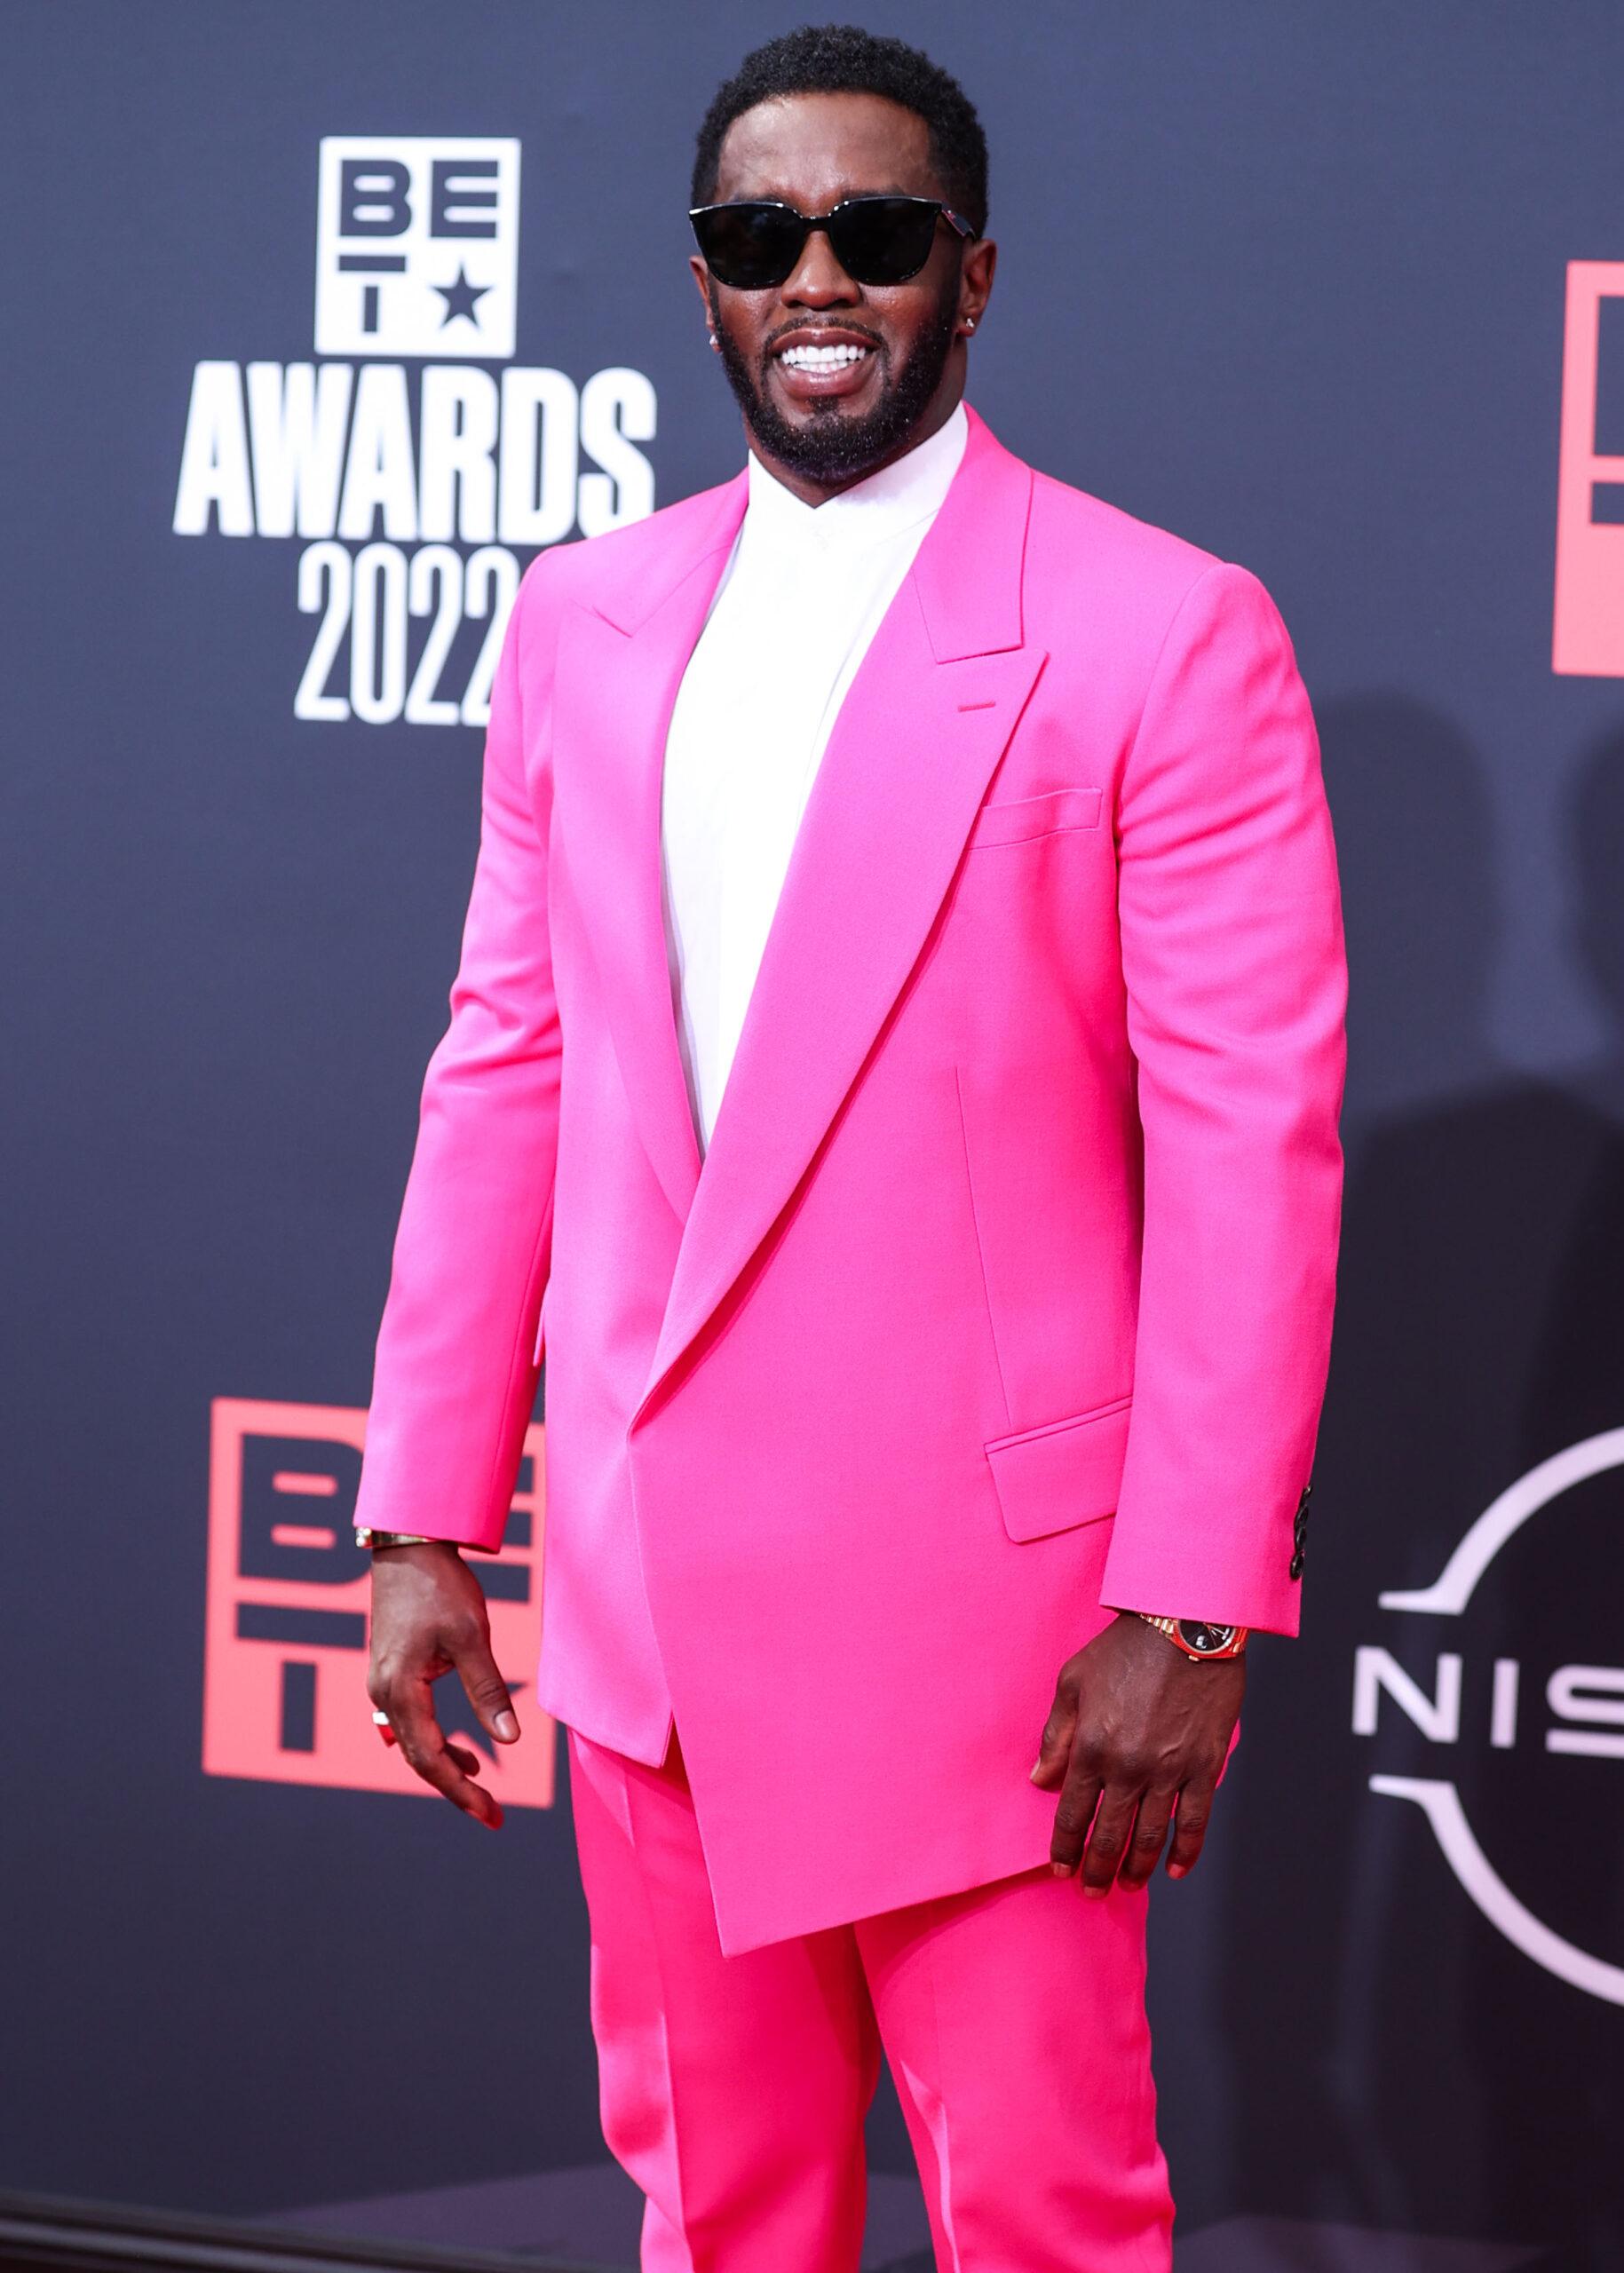 Diddy no BET Awards 2022